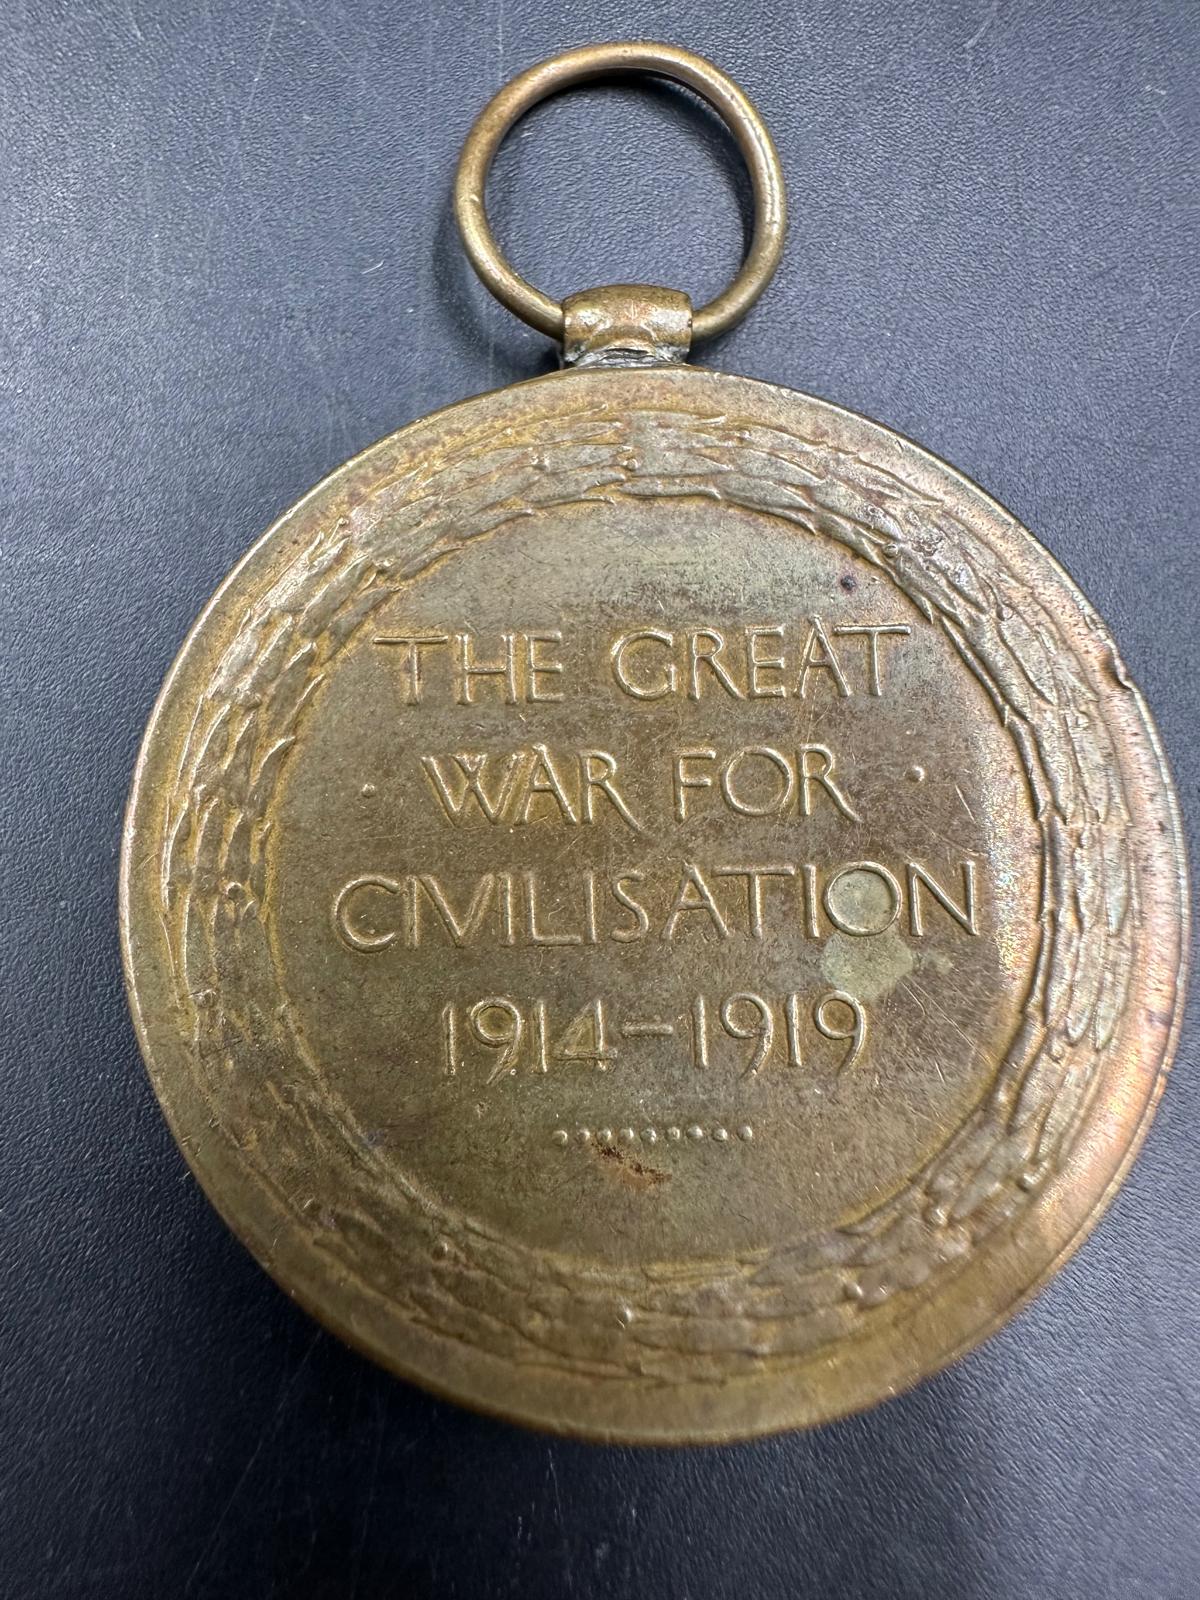 Militaria: WWII Defence Medal, WWI Great War Medal 102418 DVR T G Wilson, RA and a 1914-1918 medal 2 - Image 2 of 4